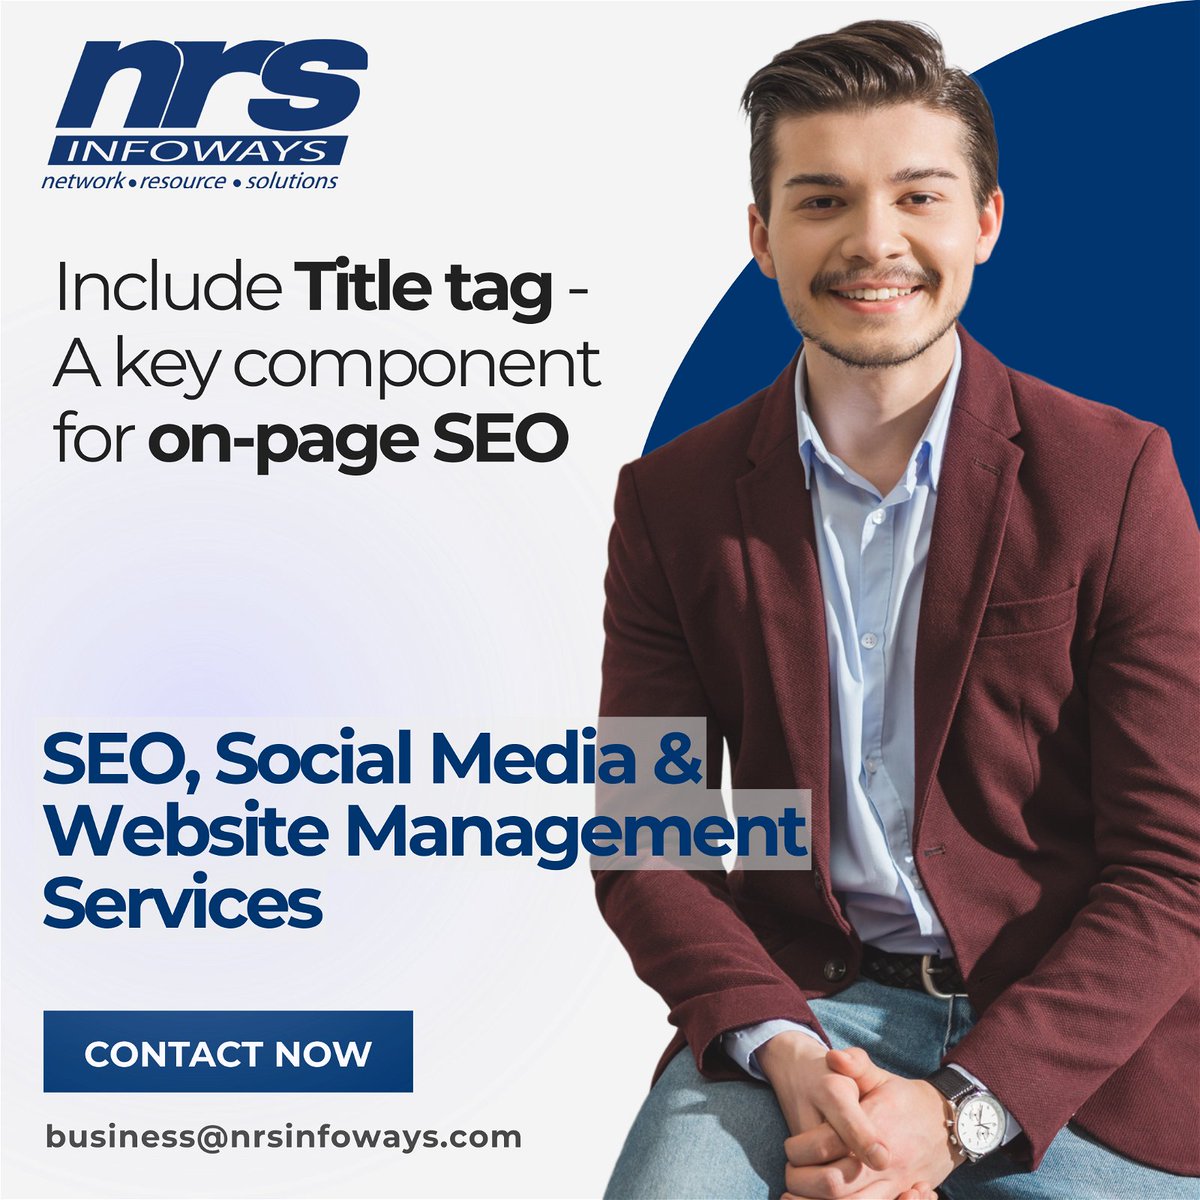 Unlock the secret of on-page SEO to boost your rankings with a notable Title tag! Know more about ideal Title tags and how we can elevate your brand's visibility. Let's connect for discussion at business@nrsinfoways.com 🚀 #nrsinfoways #seo #titletag #onpageseo #serpoptimization